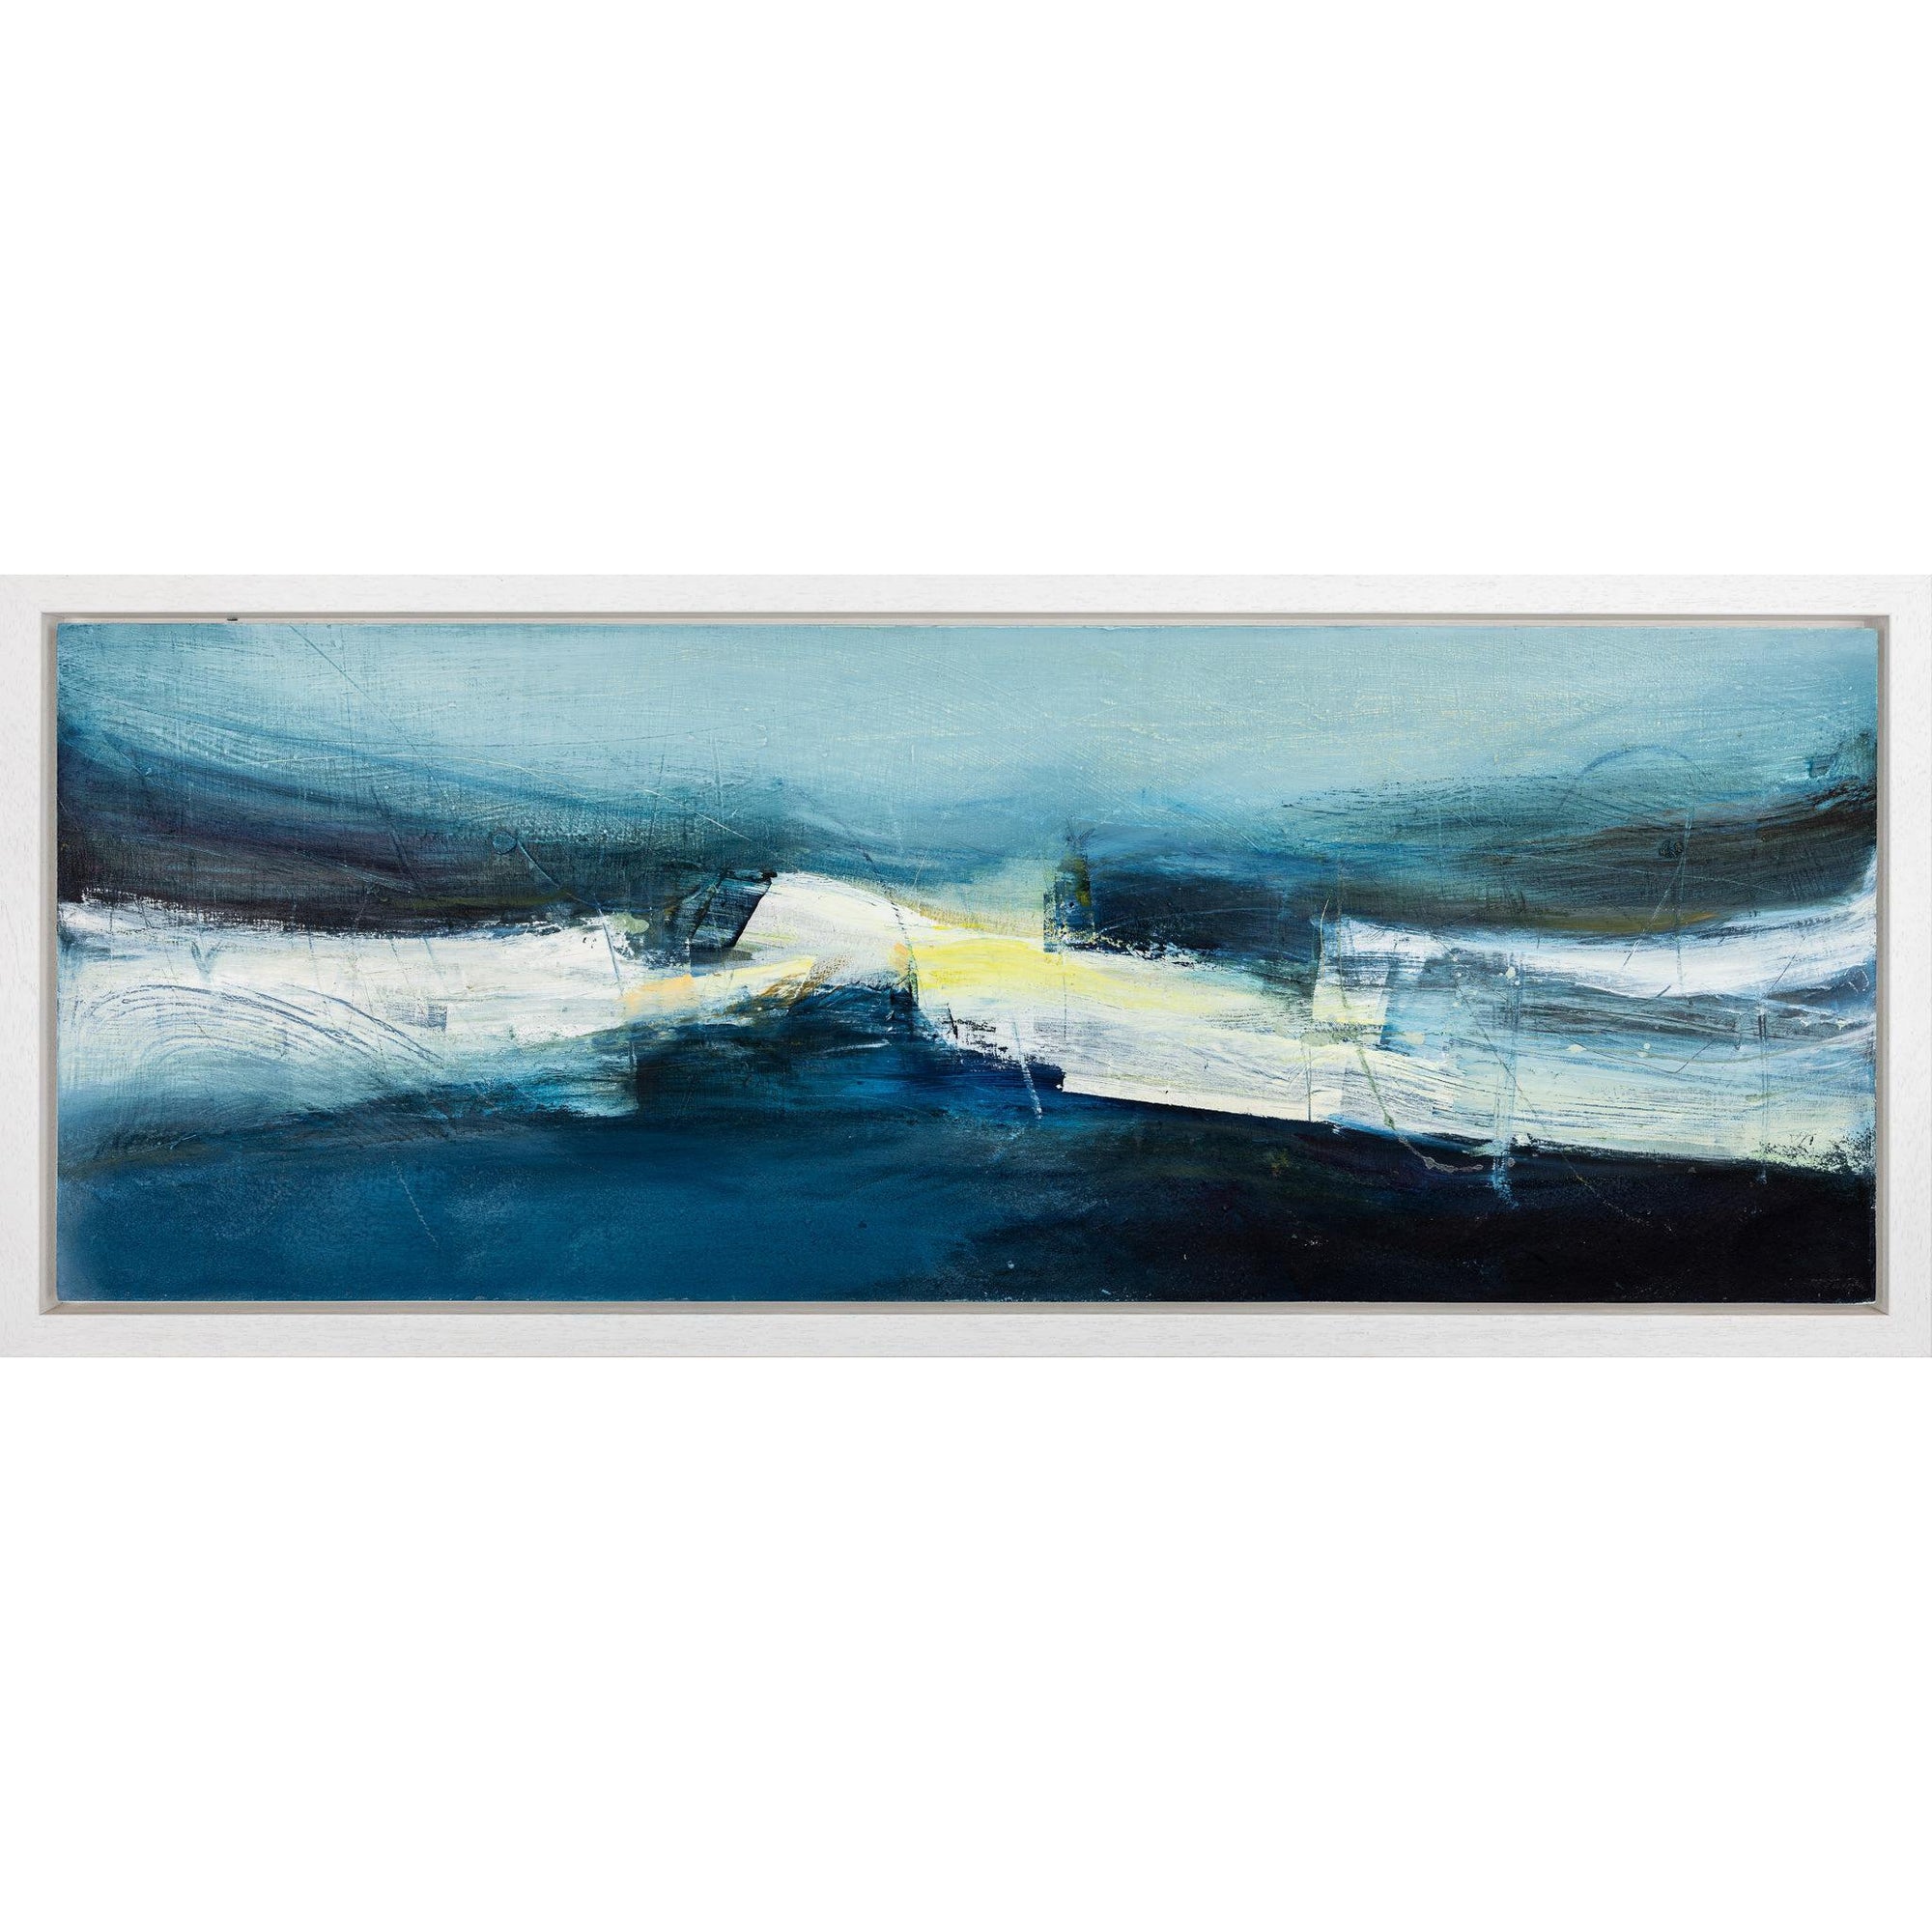 'Undertow' oil original by Justine Lois Thorpe, available at Padstow Gallery, Cornwall